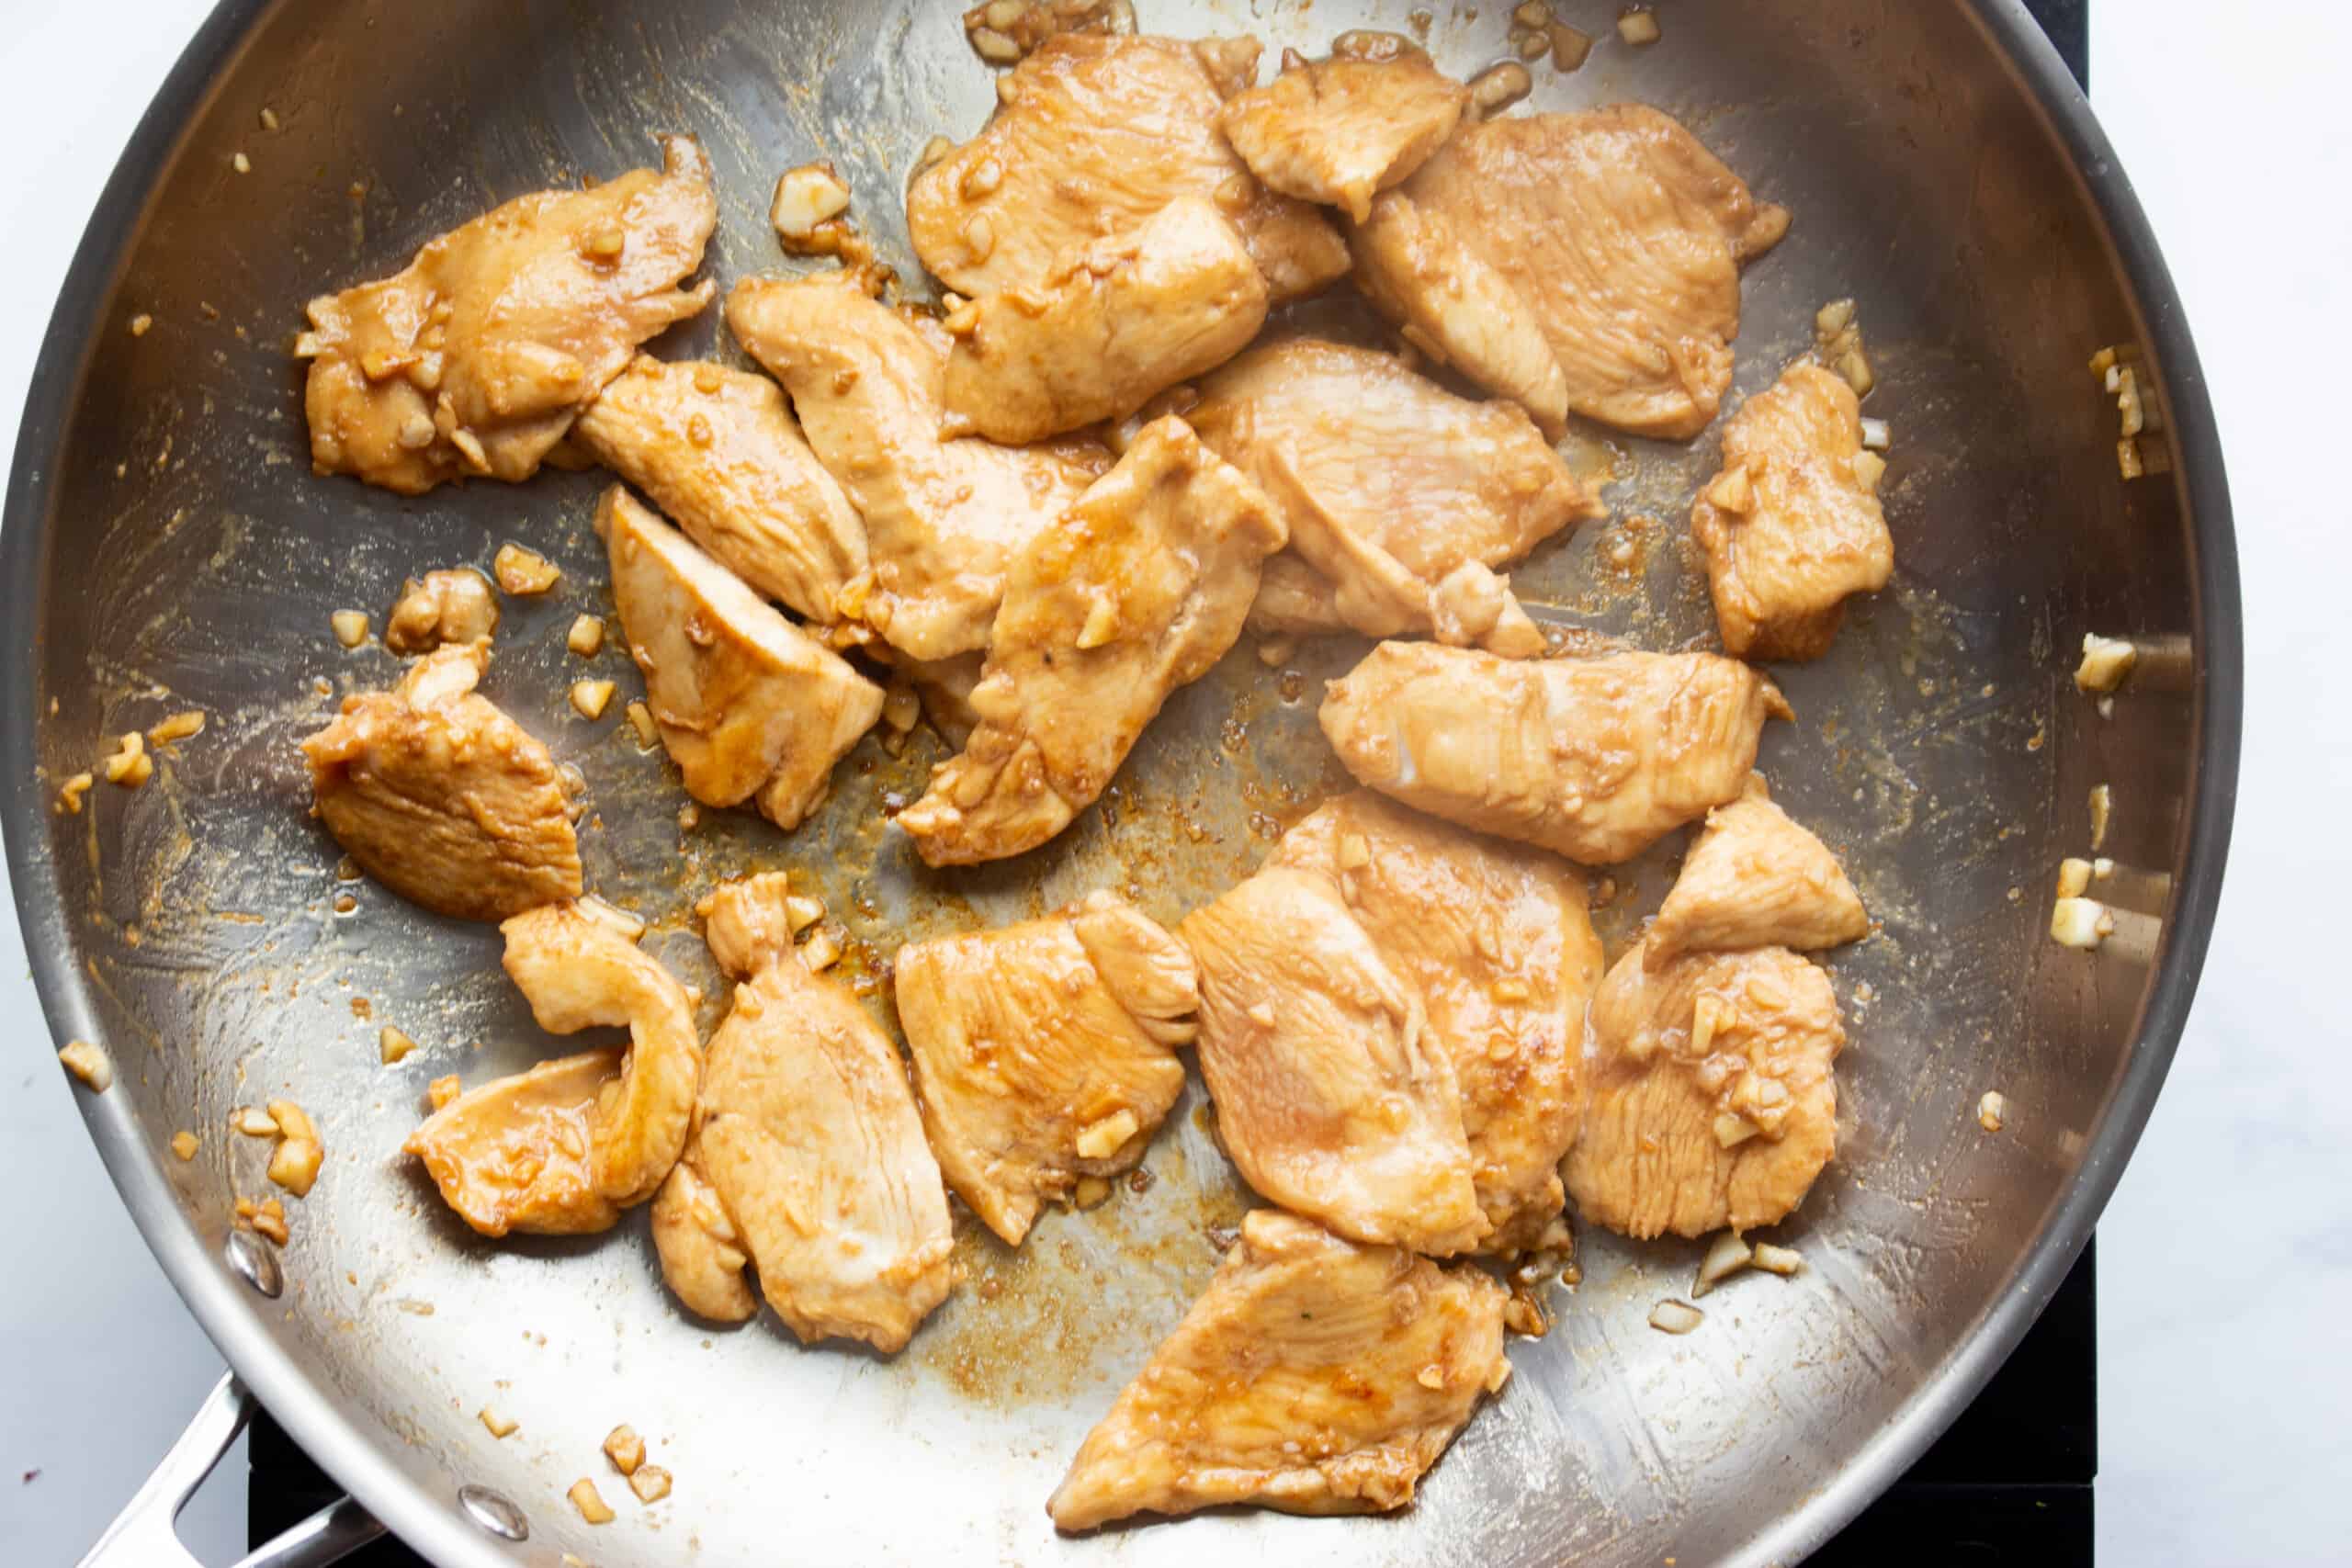 Marinated chicken pieces frying in a stainless steel pan.